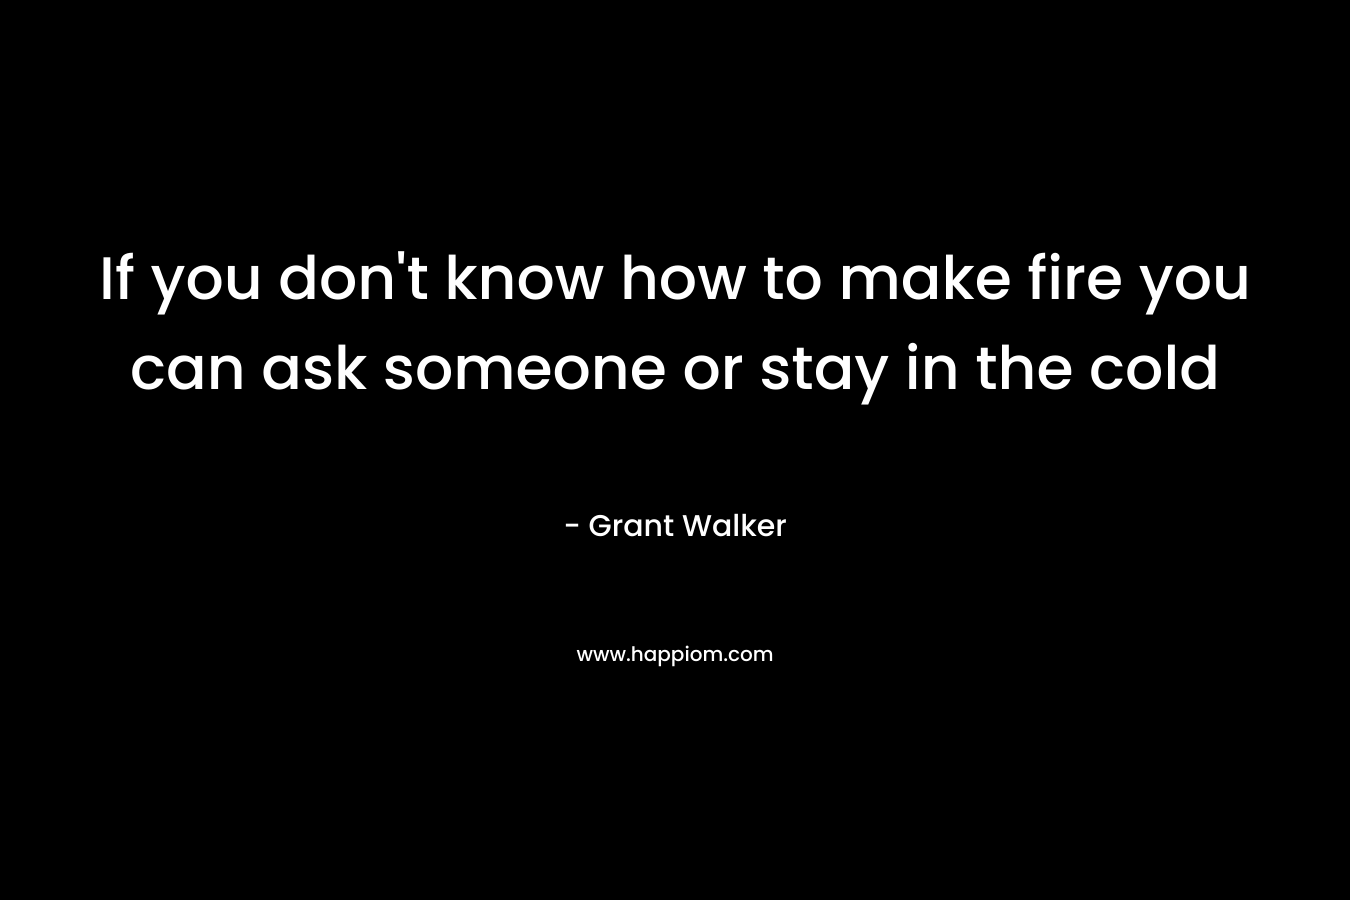 If you don't know how to make fire you can ask someone or stay in the cold